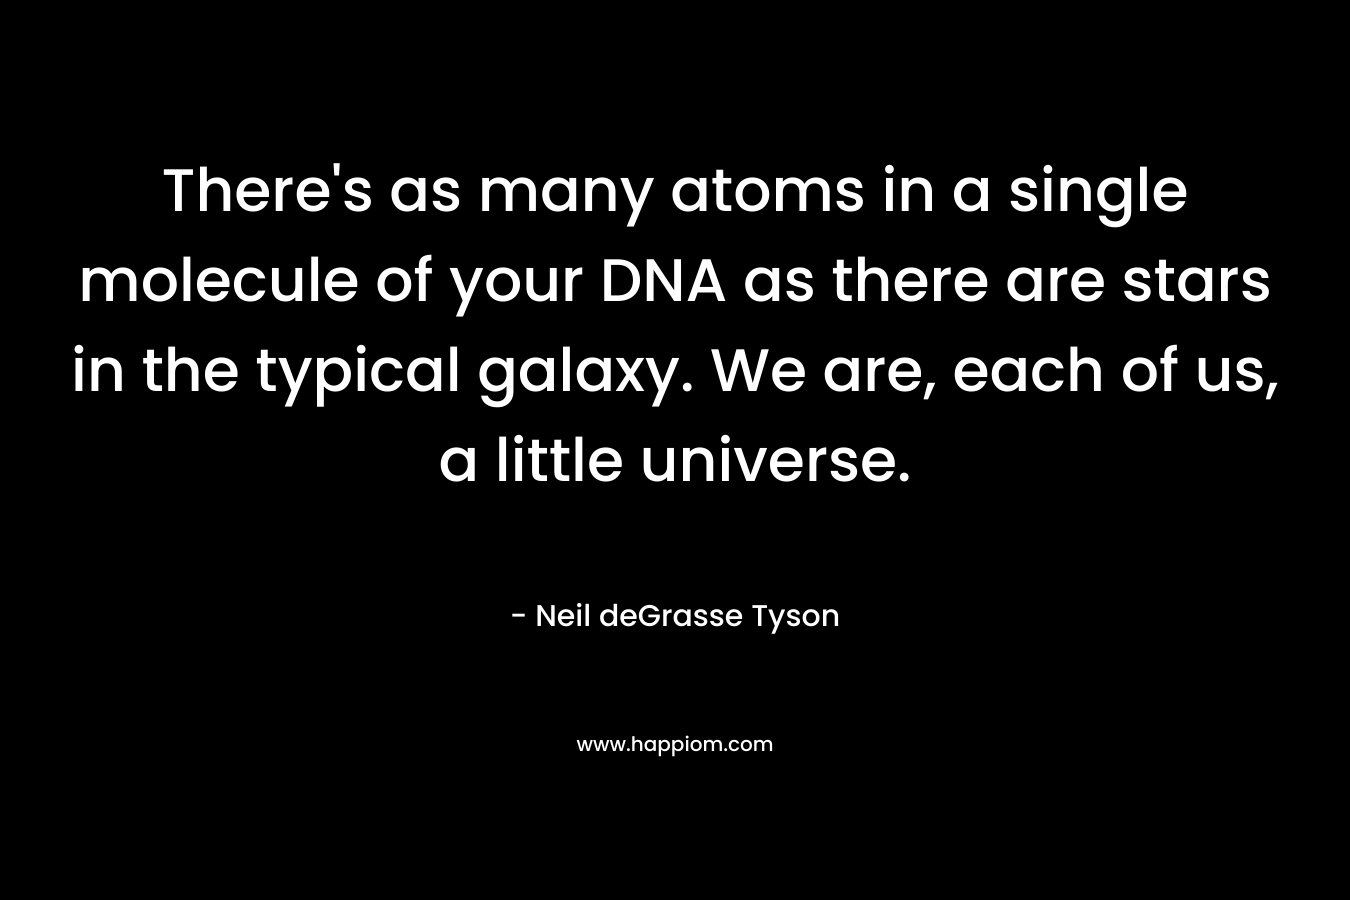 There's as many atoms in a single molecule of your DNA as there are stars in the typical galaxy. We are, each of us, a little universe.